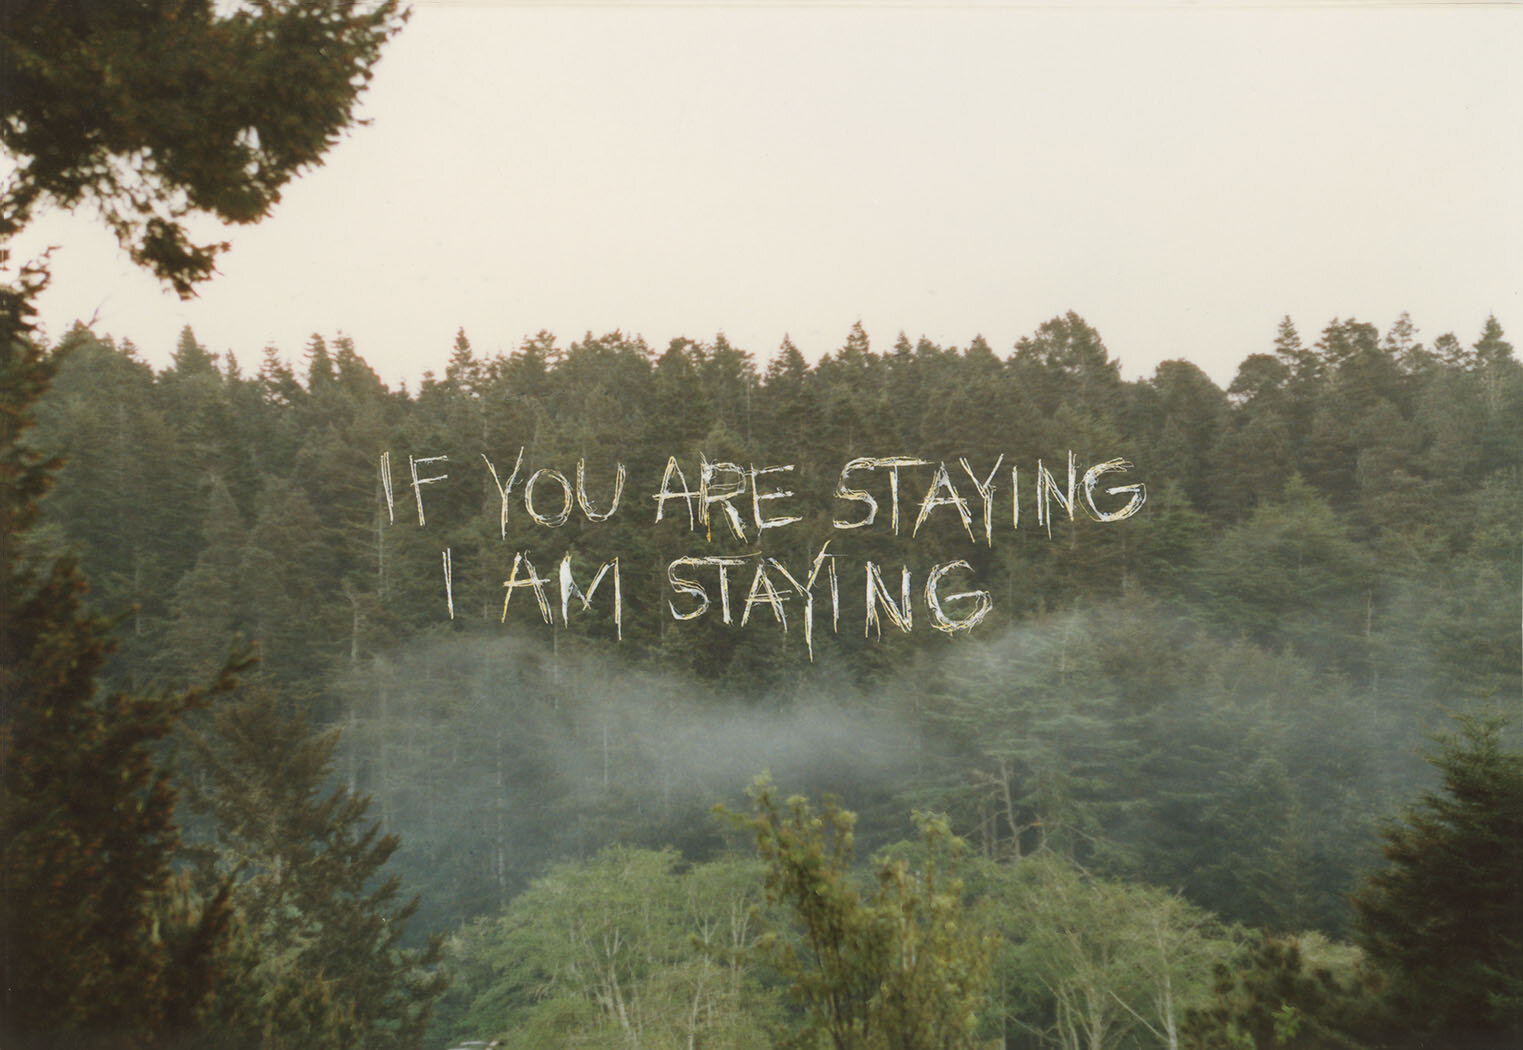  If you are staying. I am staying.  